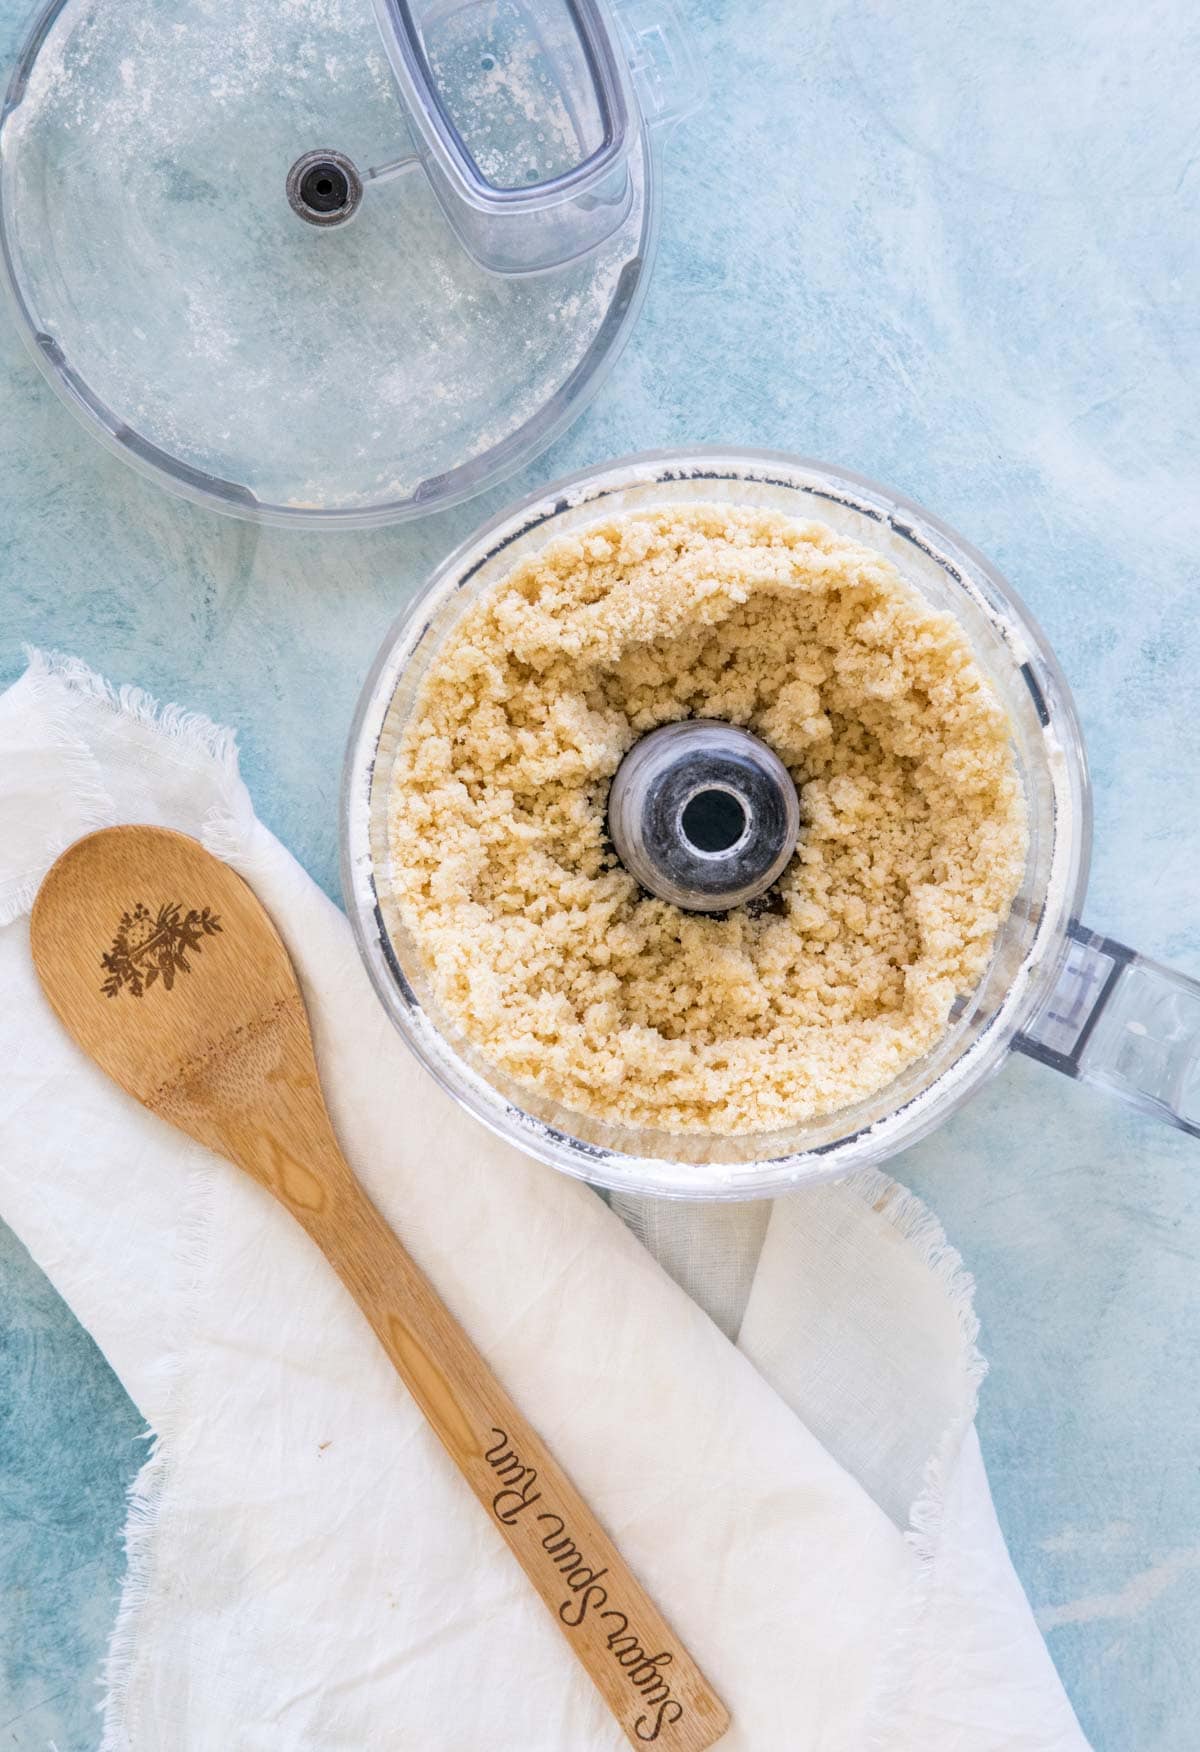 crumbly crust dough in food processor